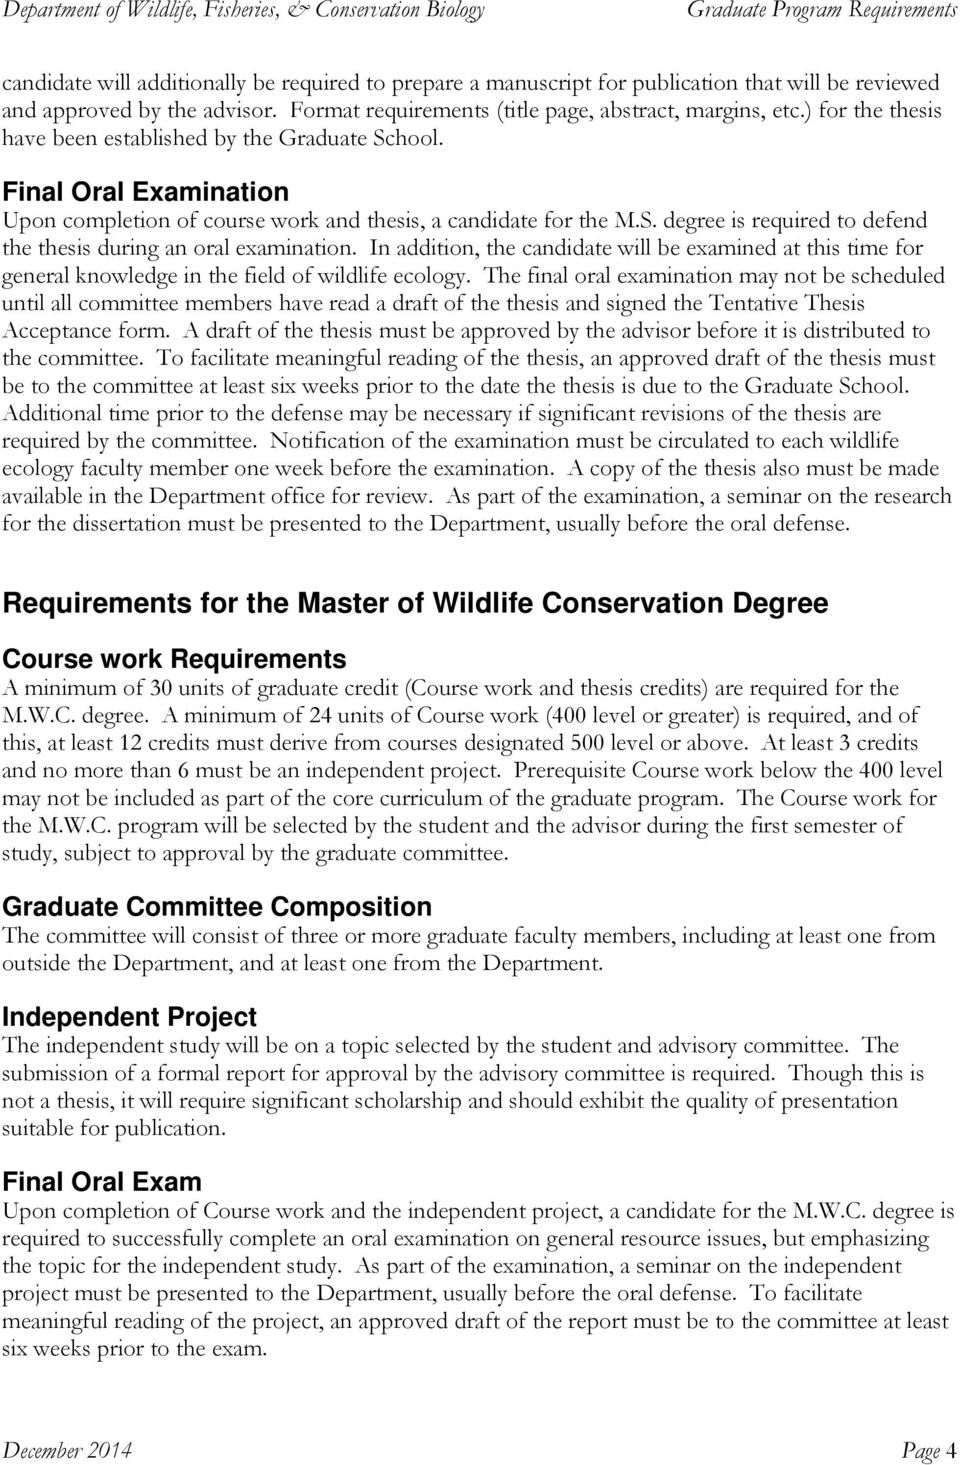 In addition, the candidate will be examined at this time for general knowledge in the field of wildlife ecology.